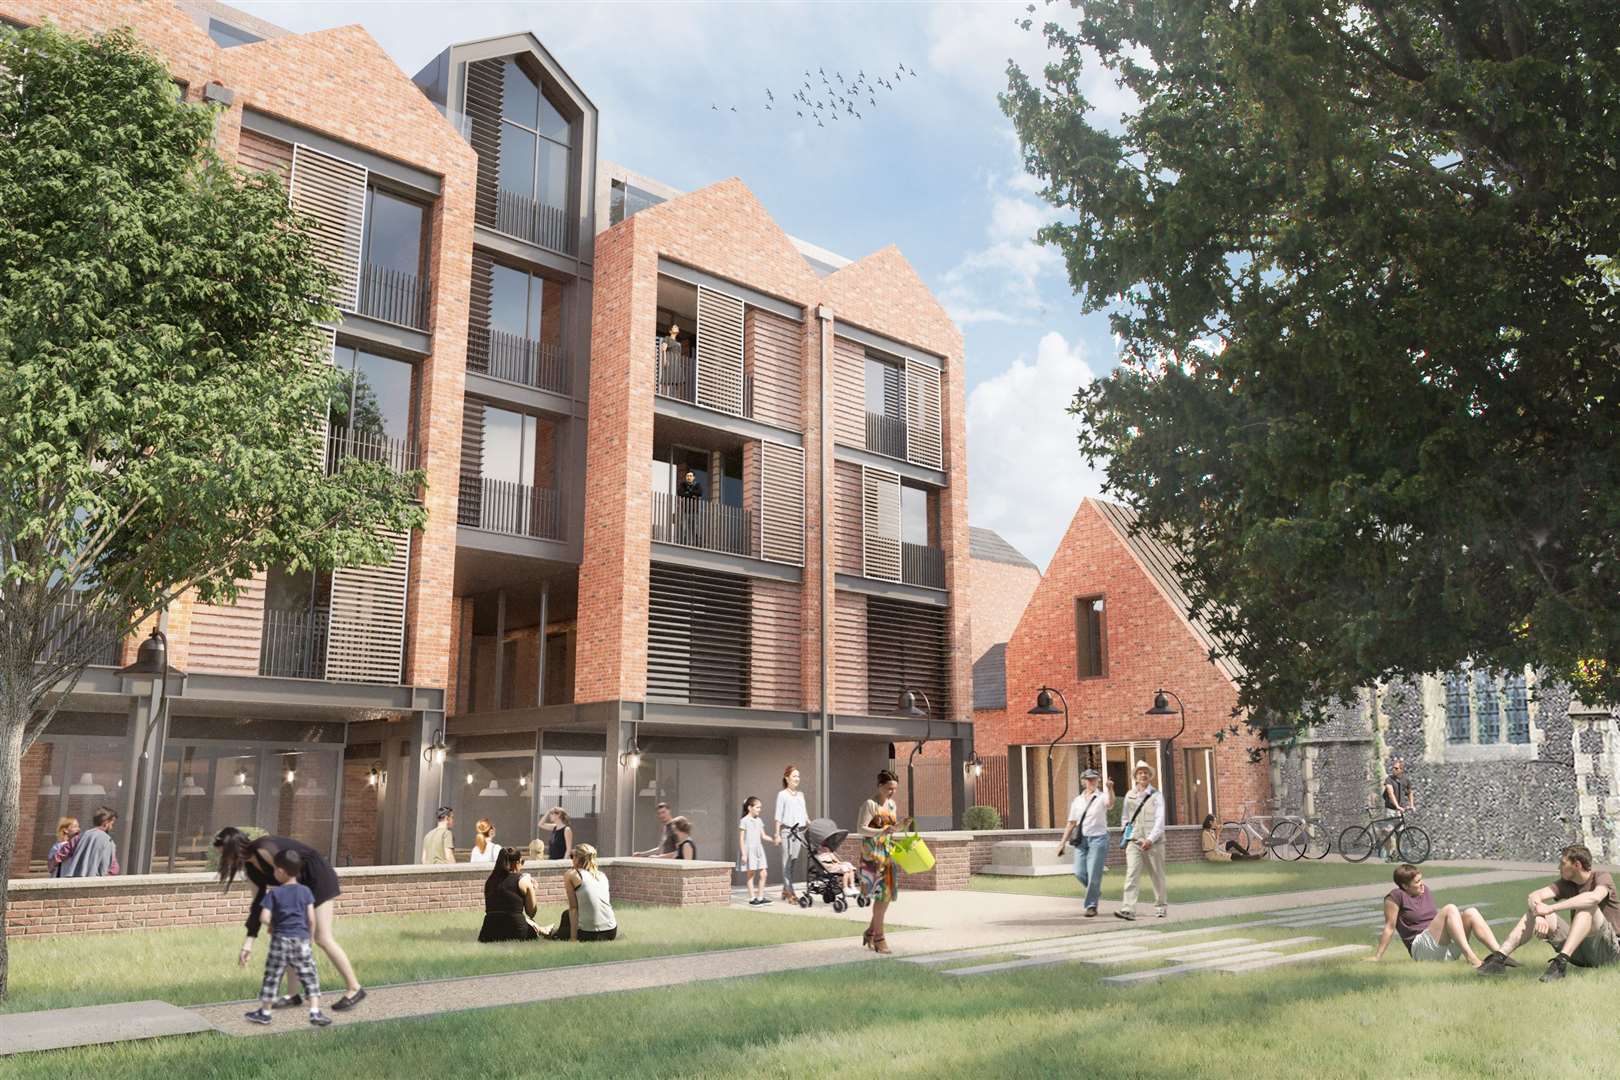 Flats and cafes will be part of the new city development